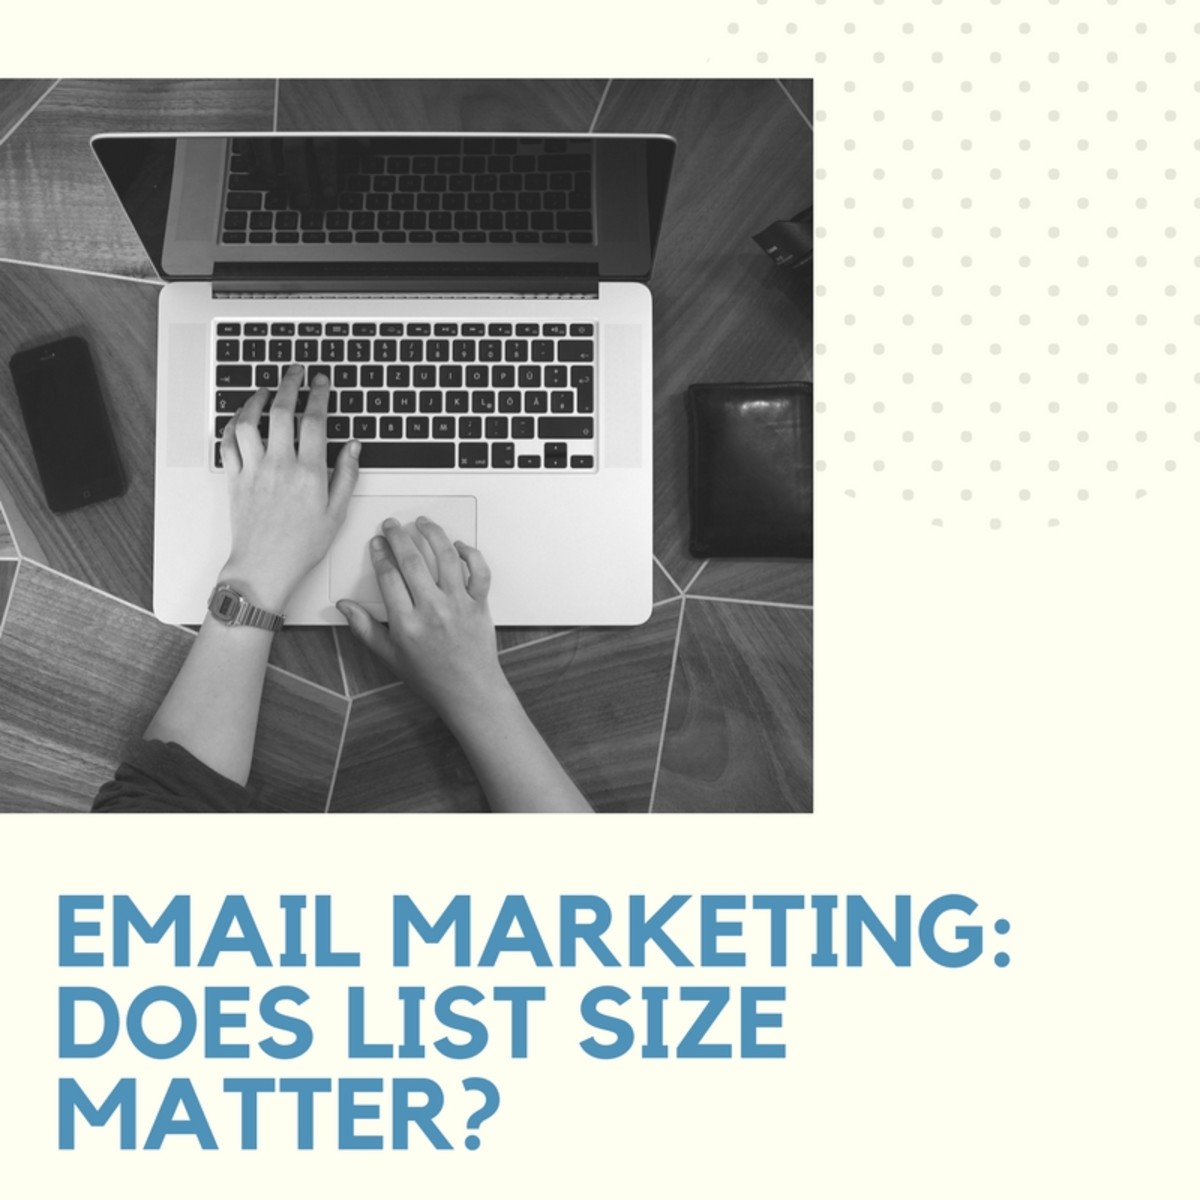 Email Marketing: Does List Size Matter?